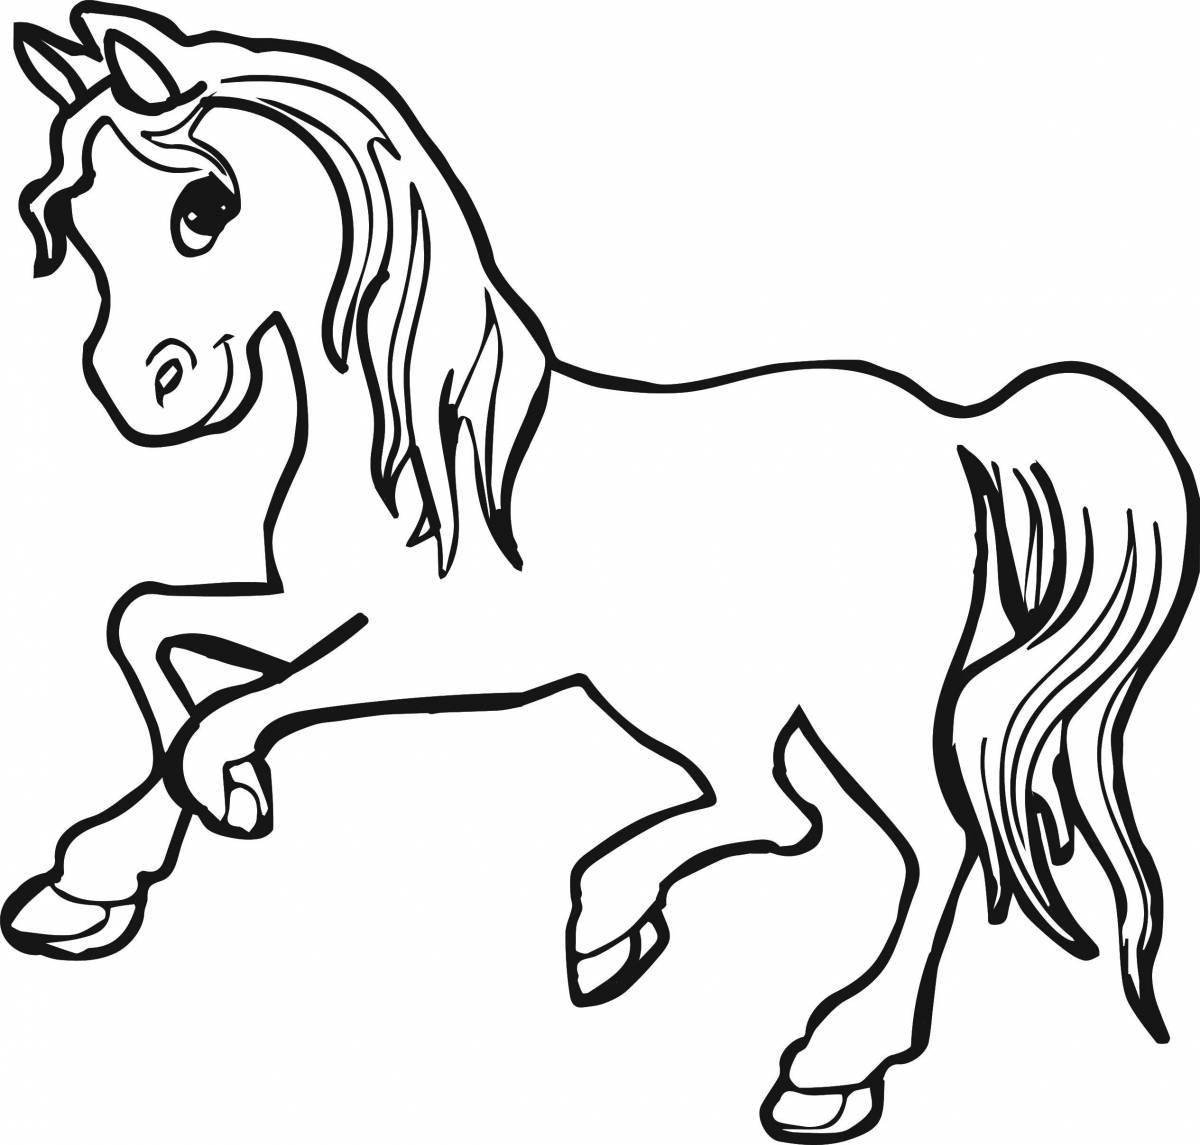 Shine horse drawing for kids